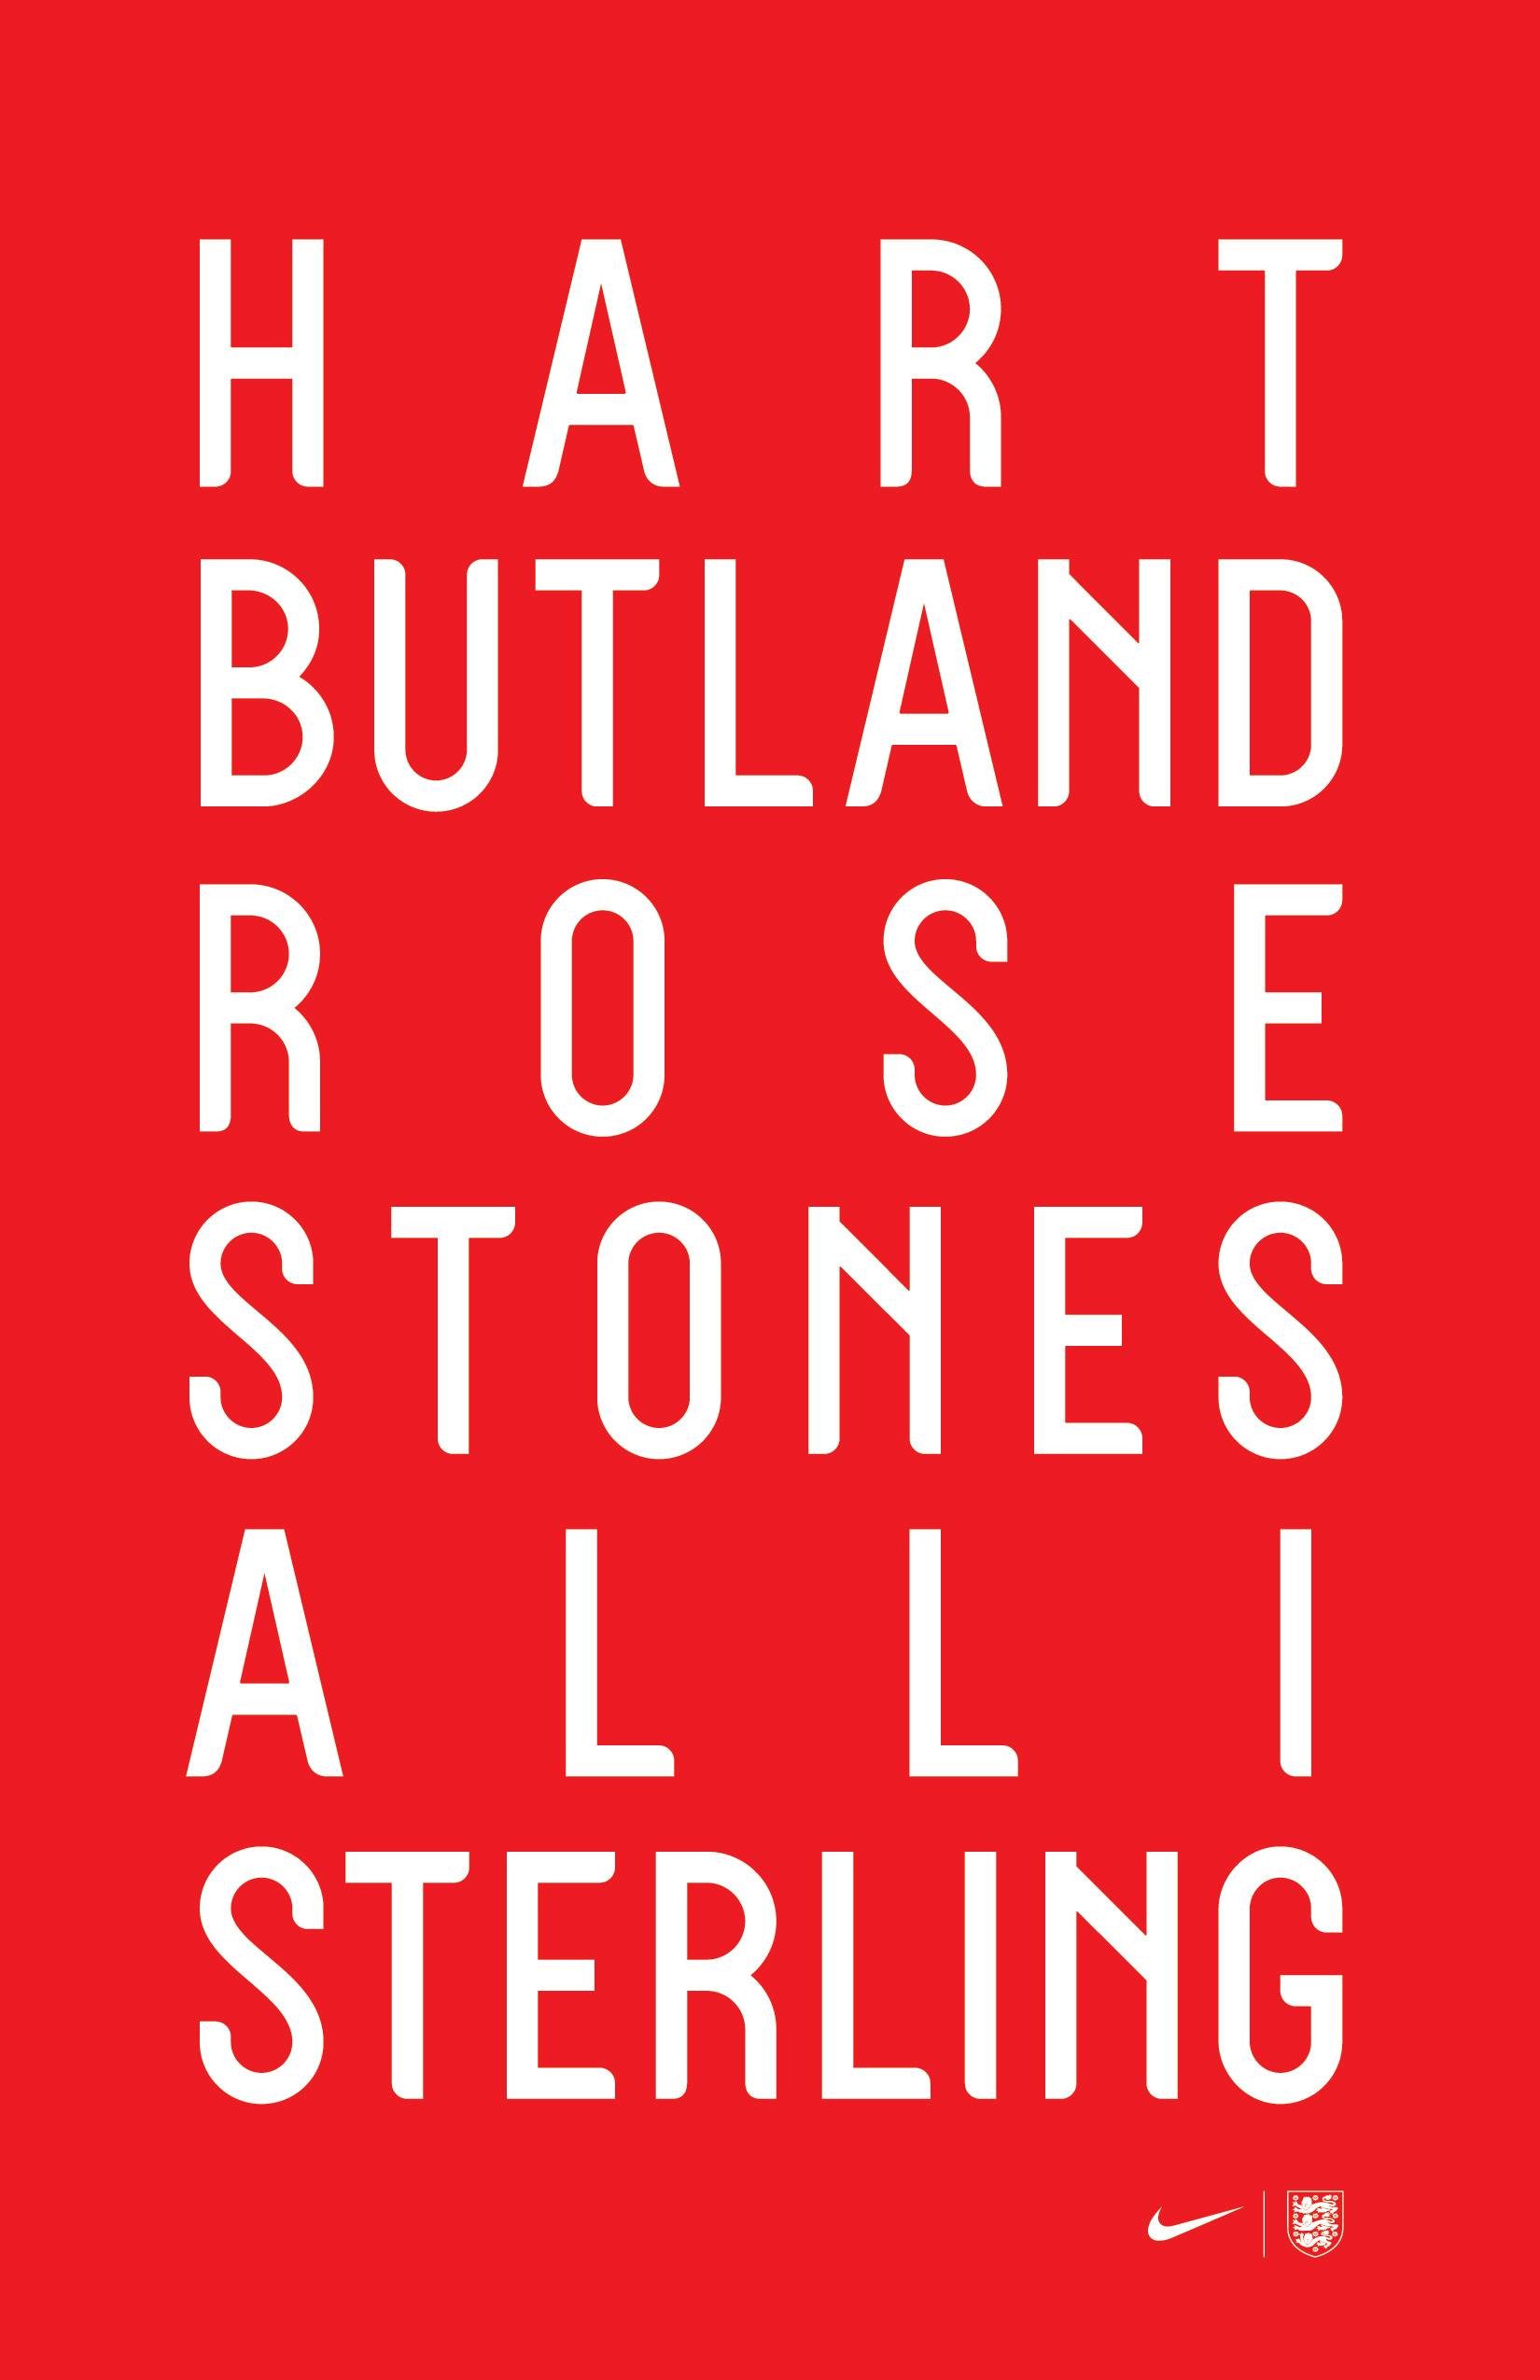 Designing England’s World Cup kit typeface